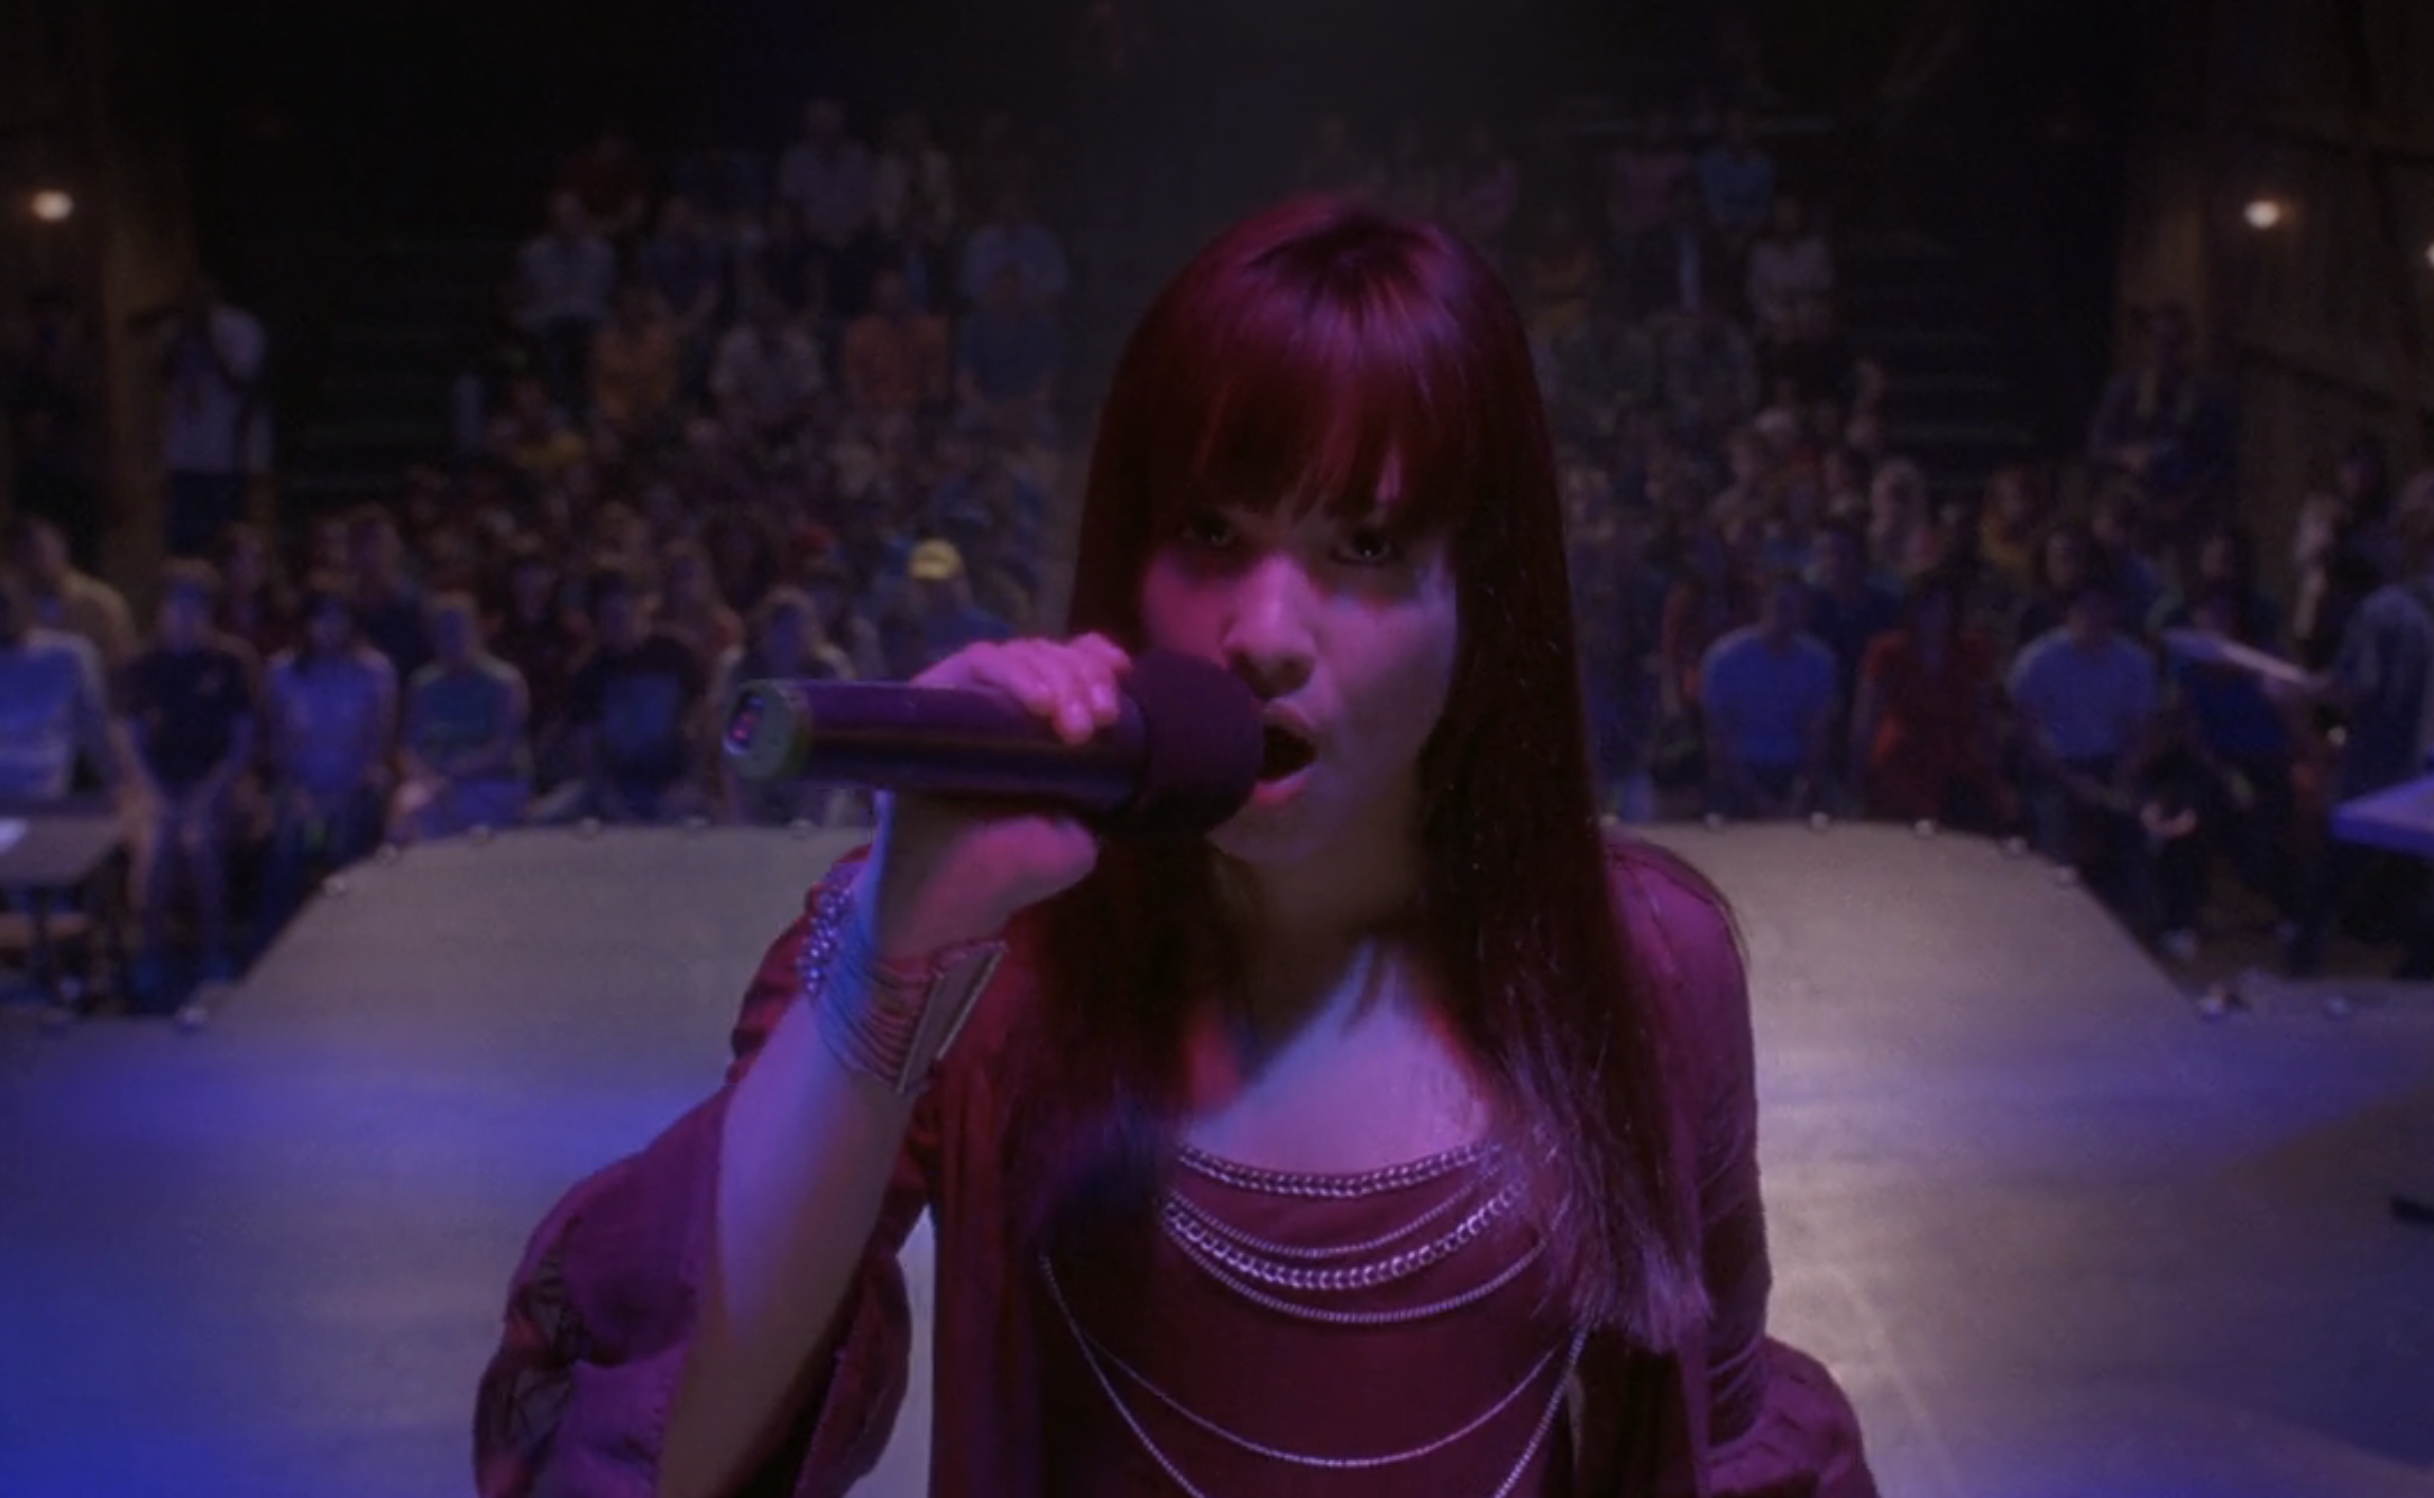 in a scene from &quot;Camp Rock,&quot; Demi singing onstage to an audience, spotlighted, wearing a casual top with microphone in hand